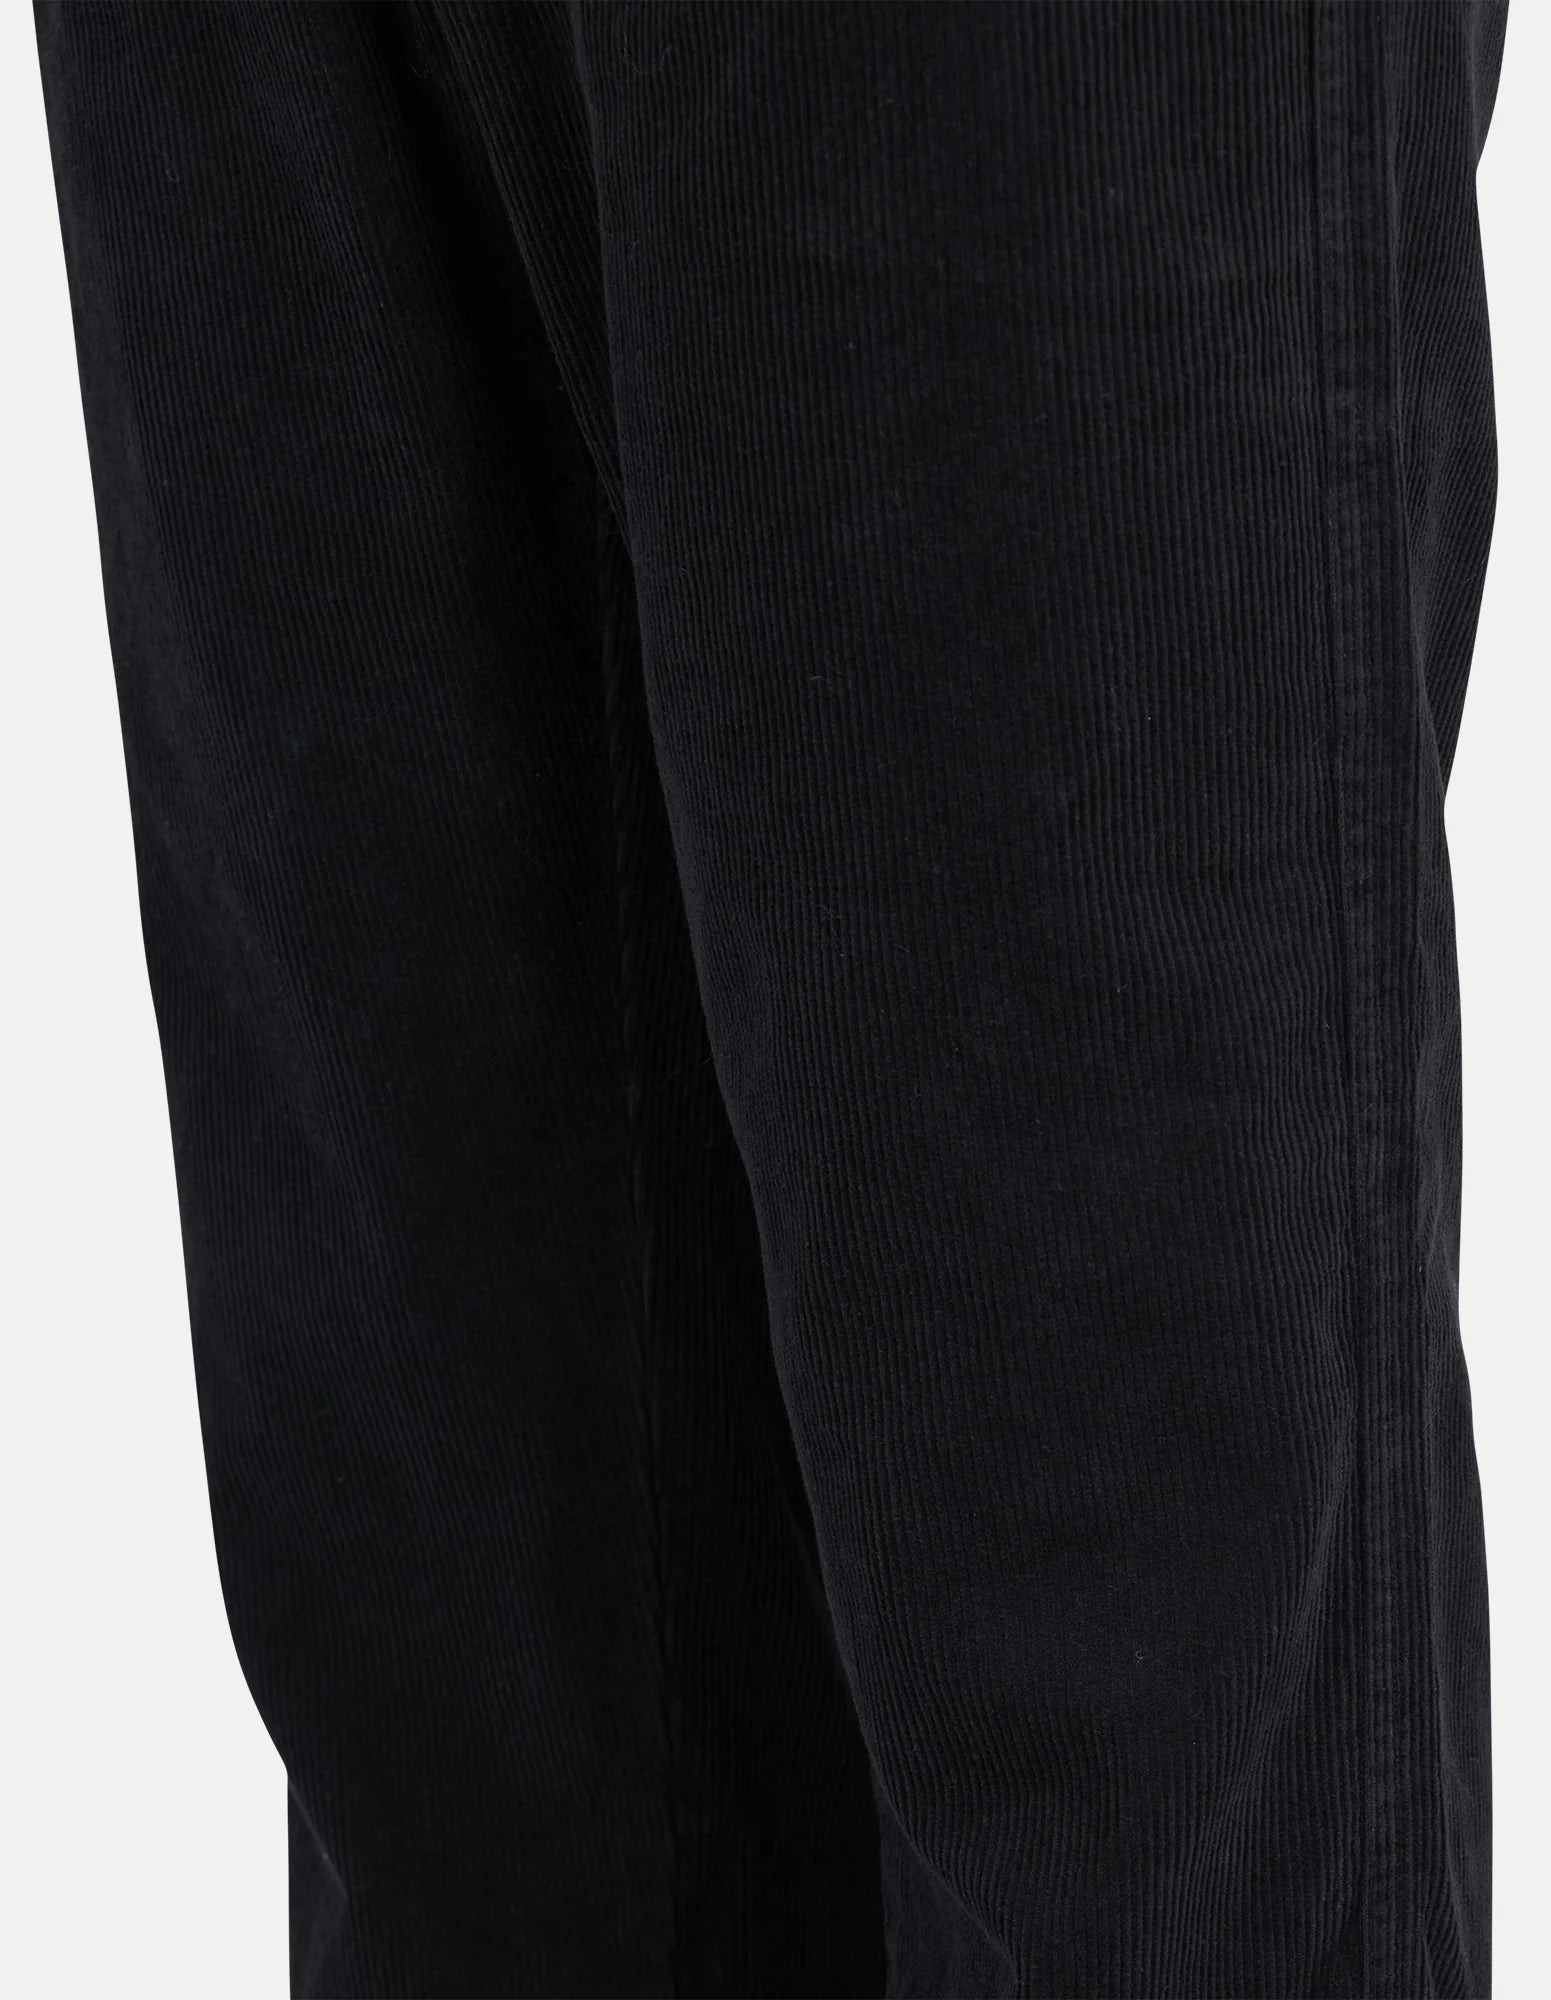 Sunnyville Shadow Pant - Washed Black